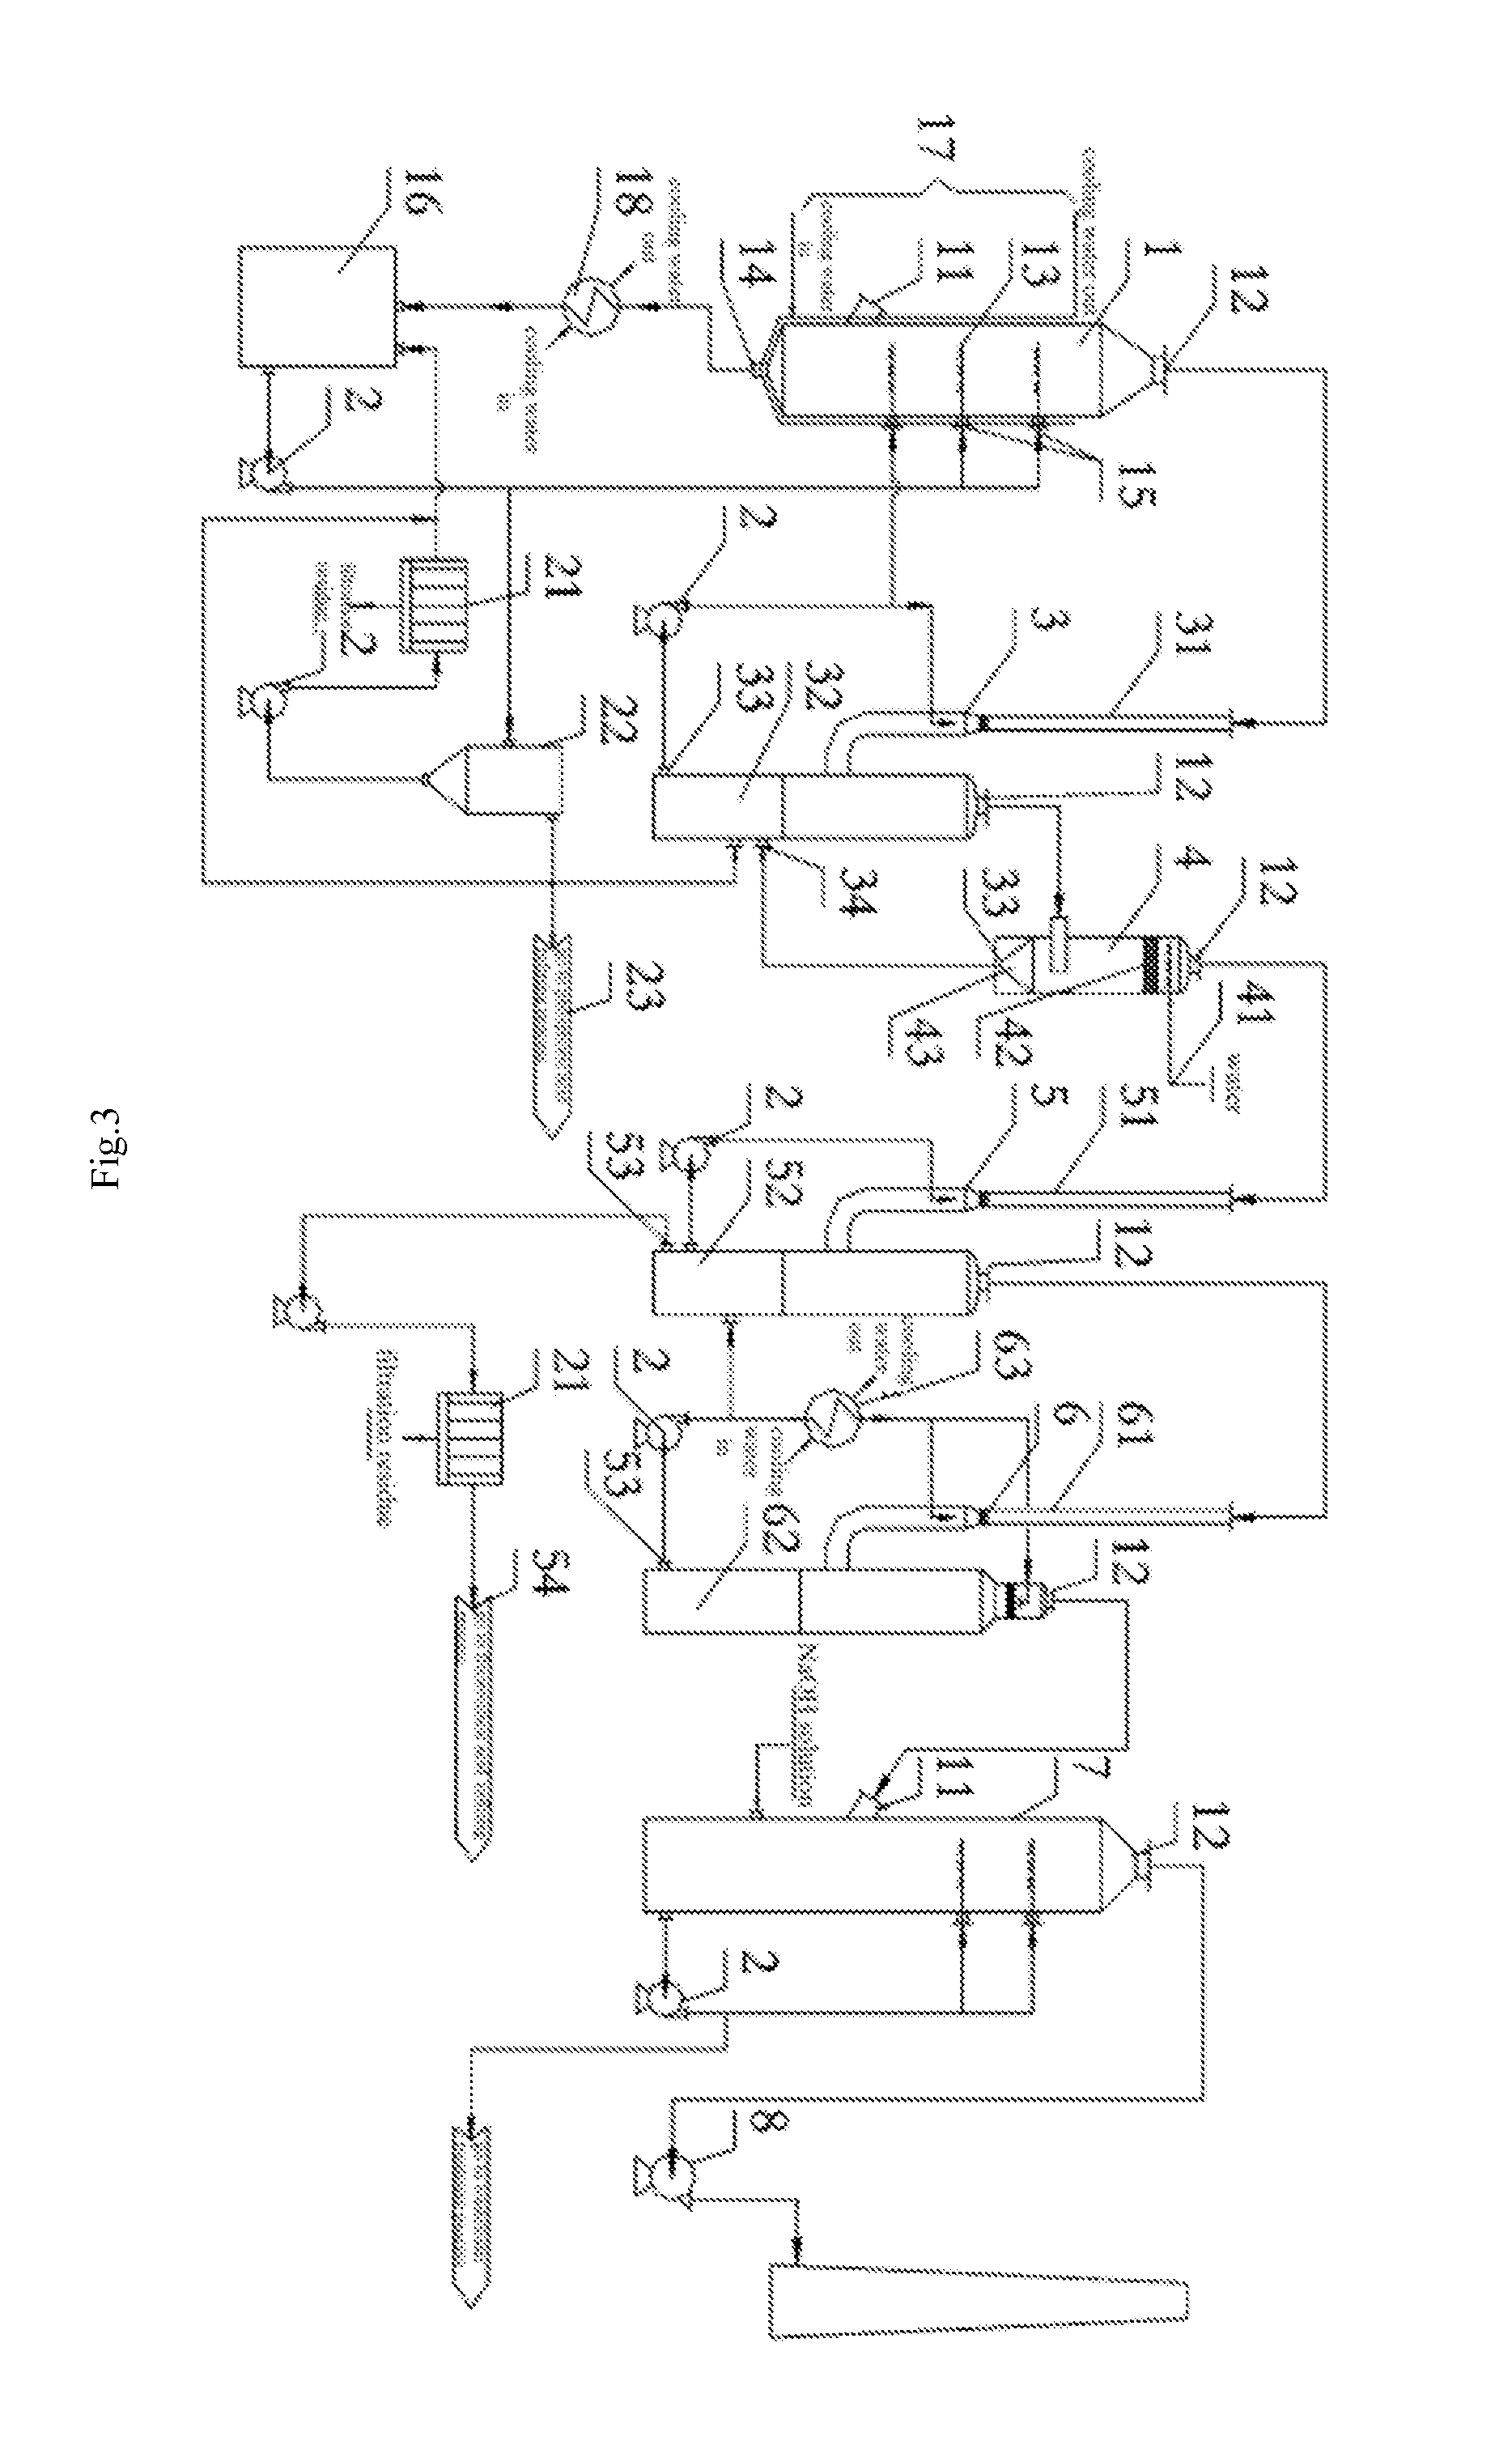 Device and process for fluorine recovery from smoke after phosphorus absorption by hydration in kiln process for production of phosphoric acid